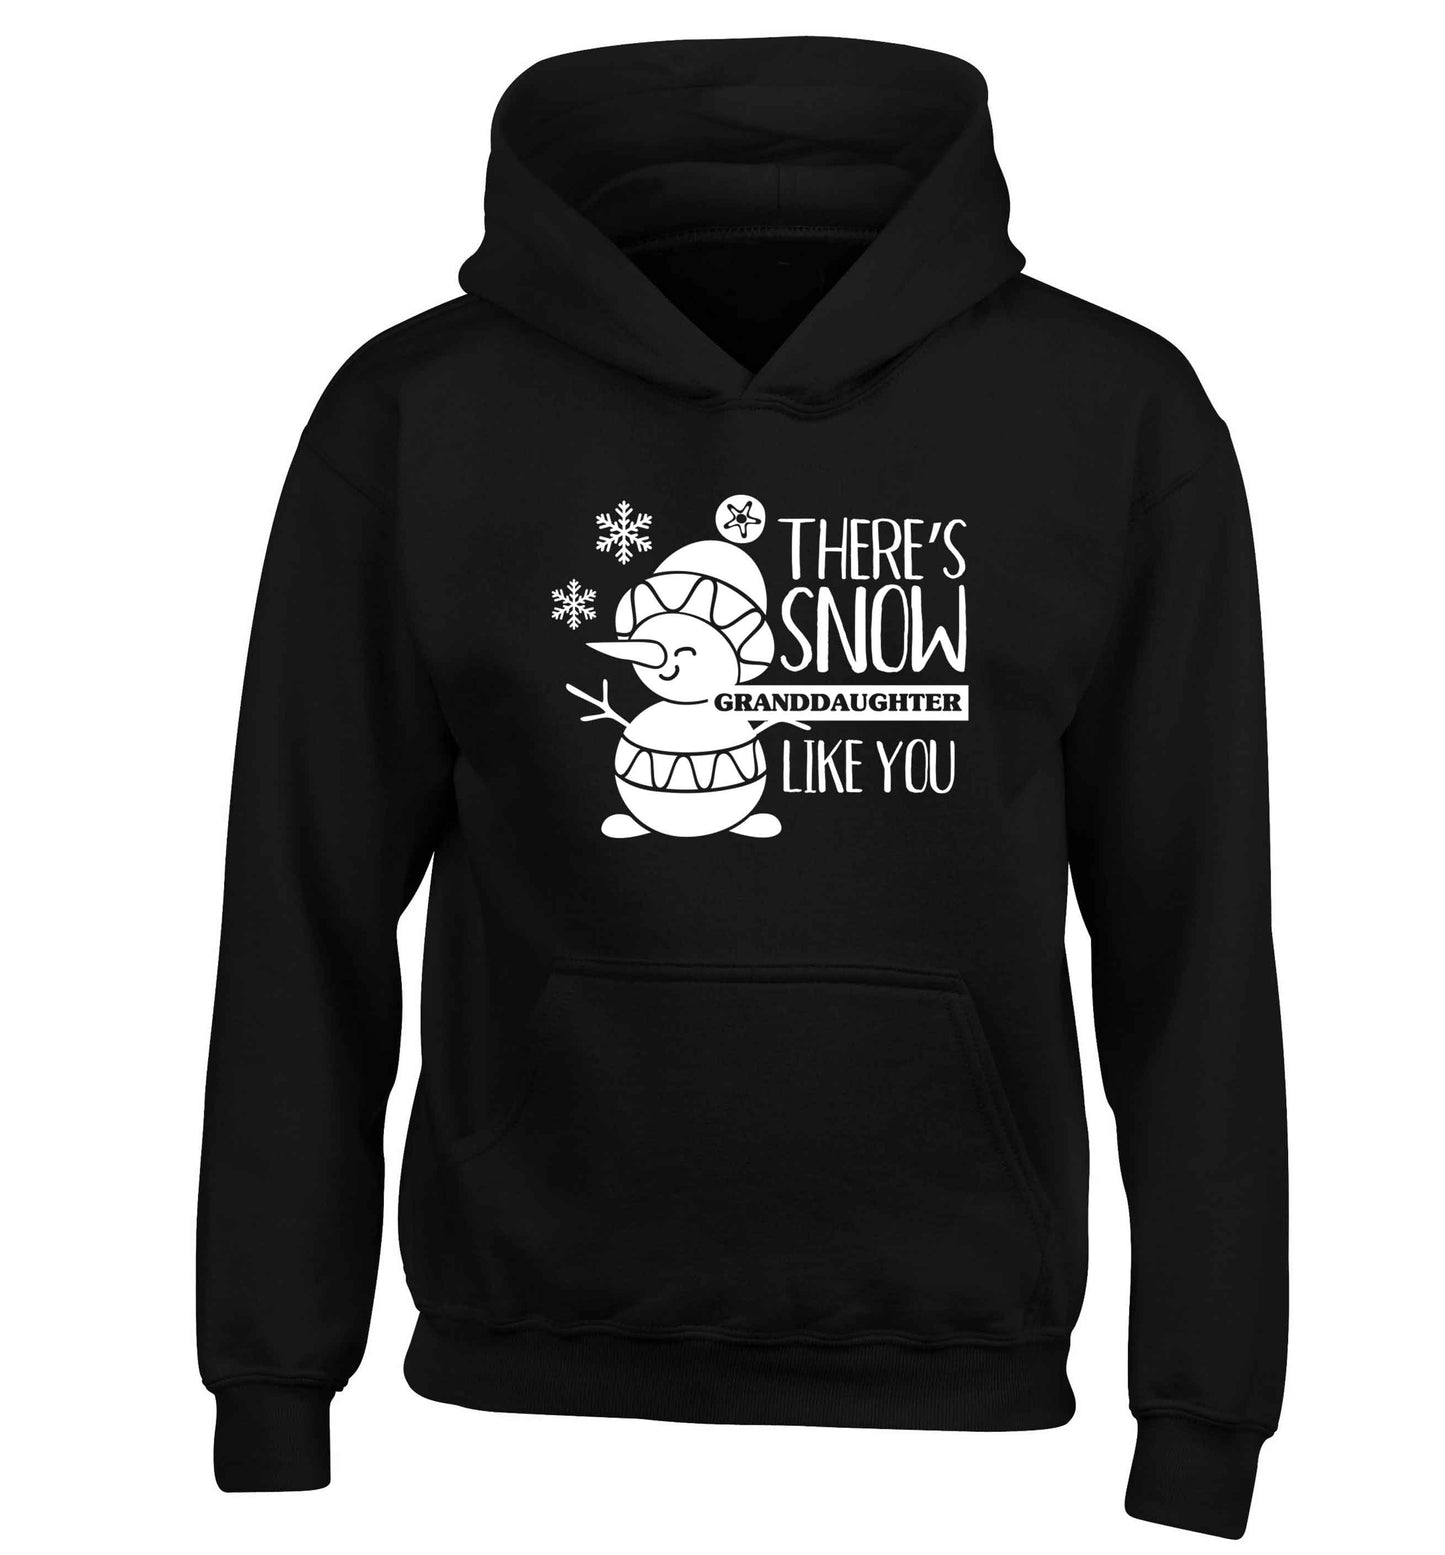 There's snow granddaughter like you children's black hoodie 12-13 Years